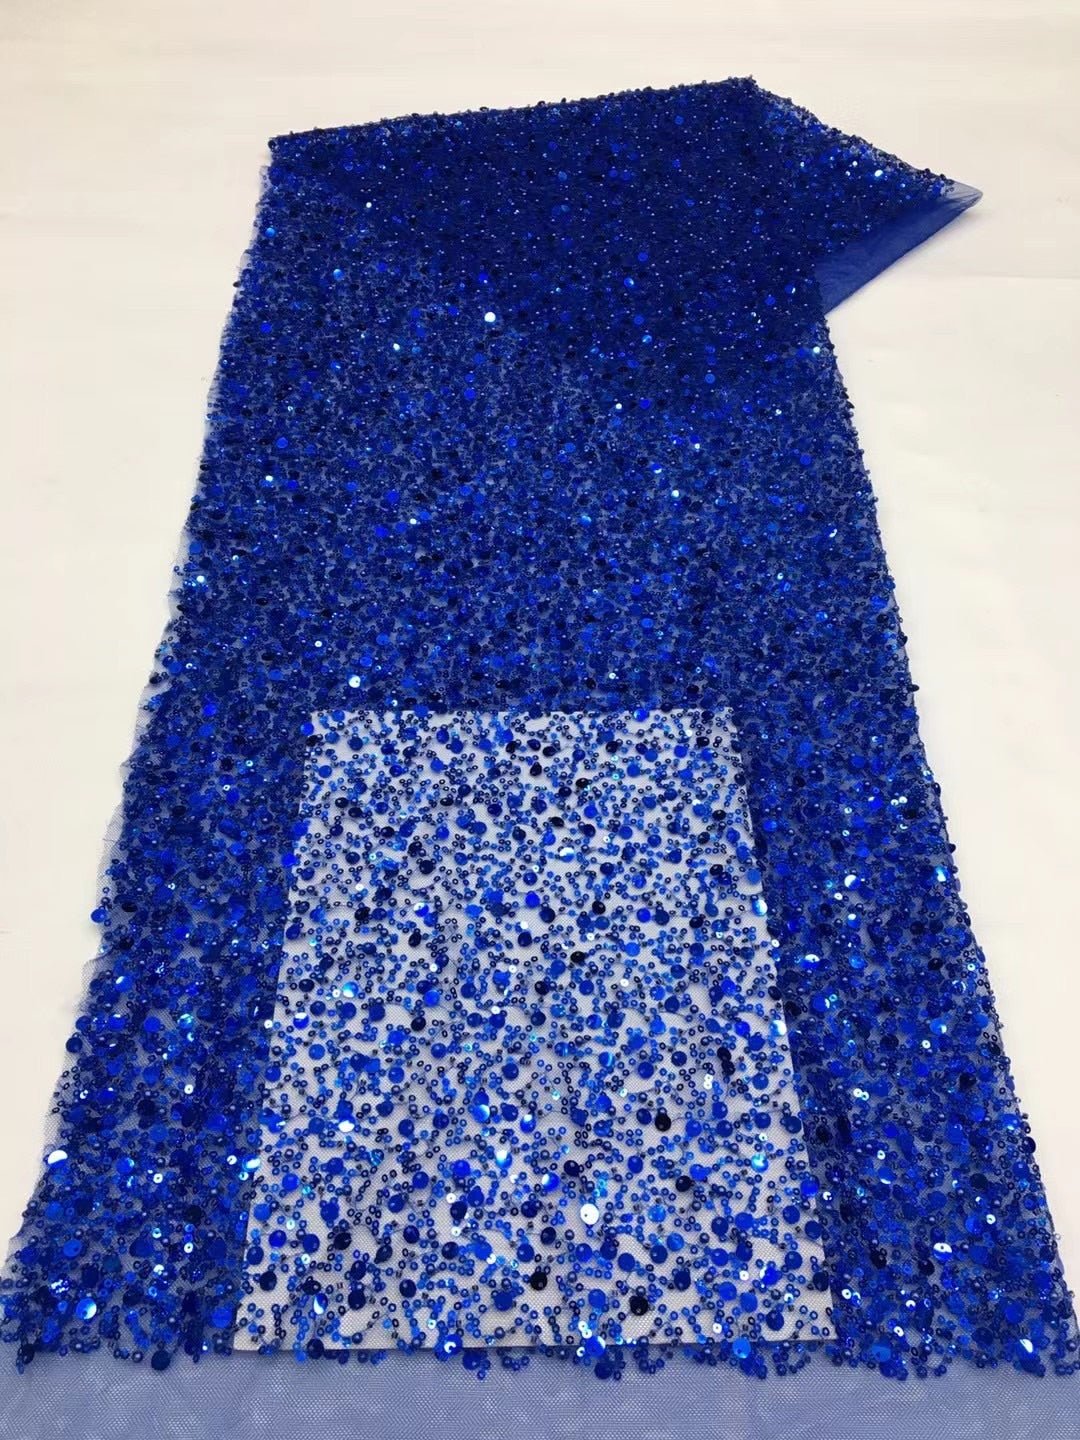 3 YARDS / 15 COLORS / GRACE Sequin Sparkly Beaded Mesh Ground Embroidery Mesh Lace Dress Tulle Fabric